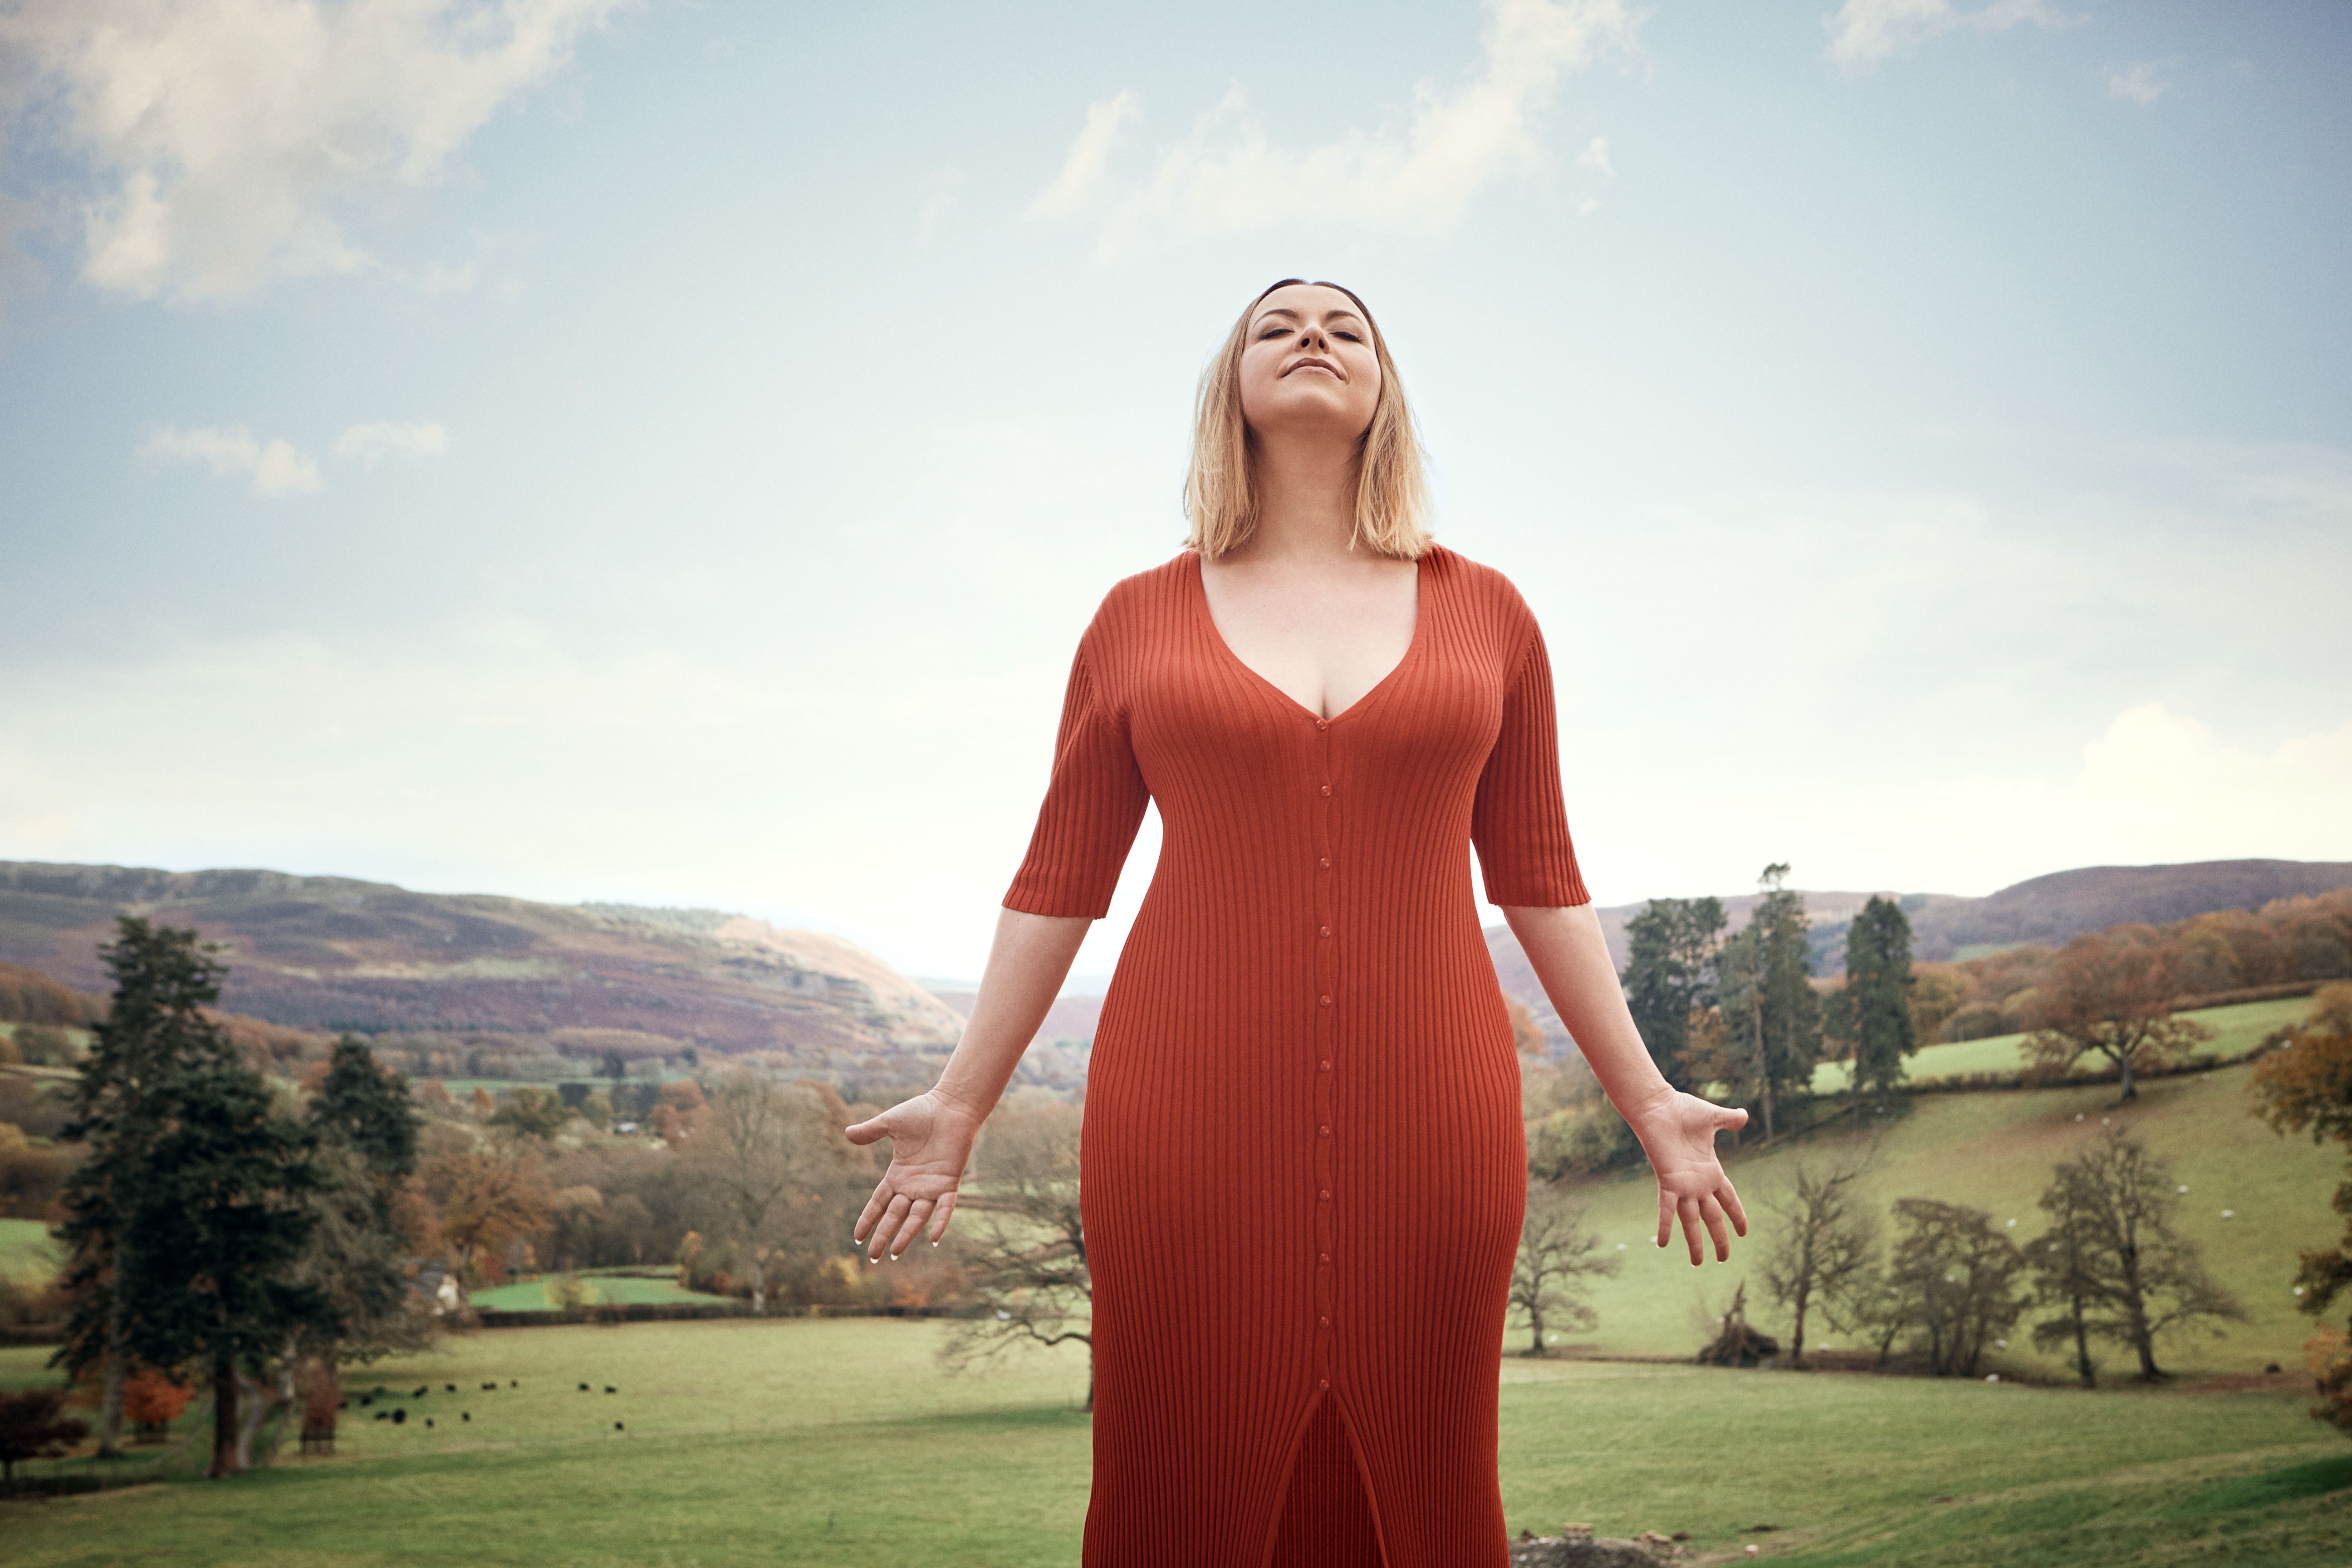 ‘I’m trying to do my bit to help save humanity and help us live more consciously and more fulfillingly with the natural world,’ explains Church about her new wellness retreat in Wales